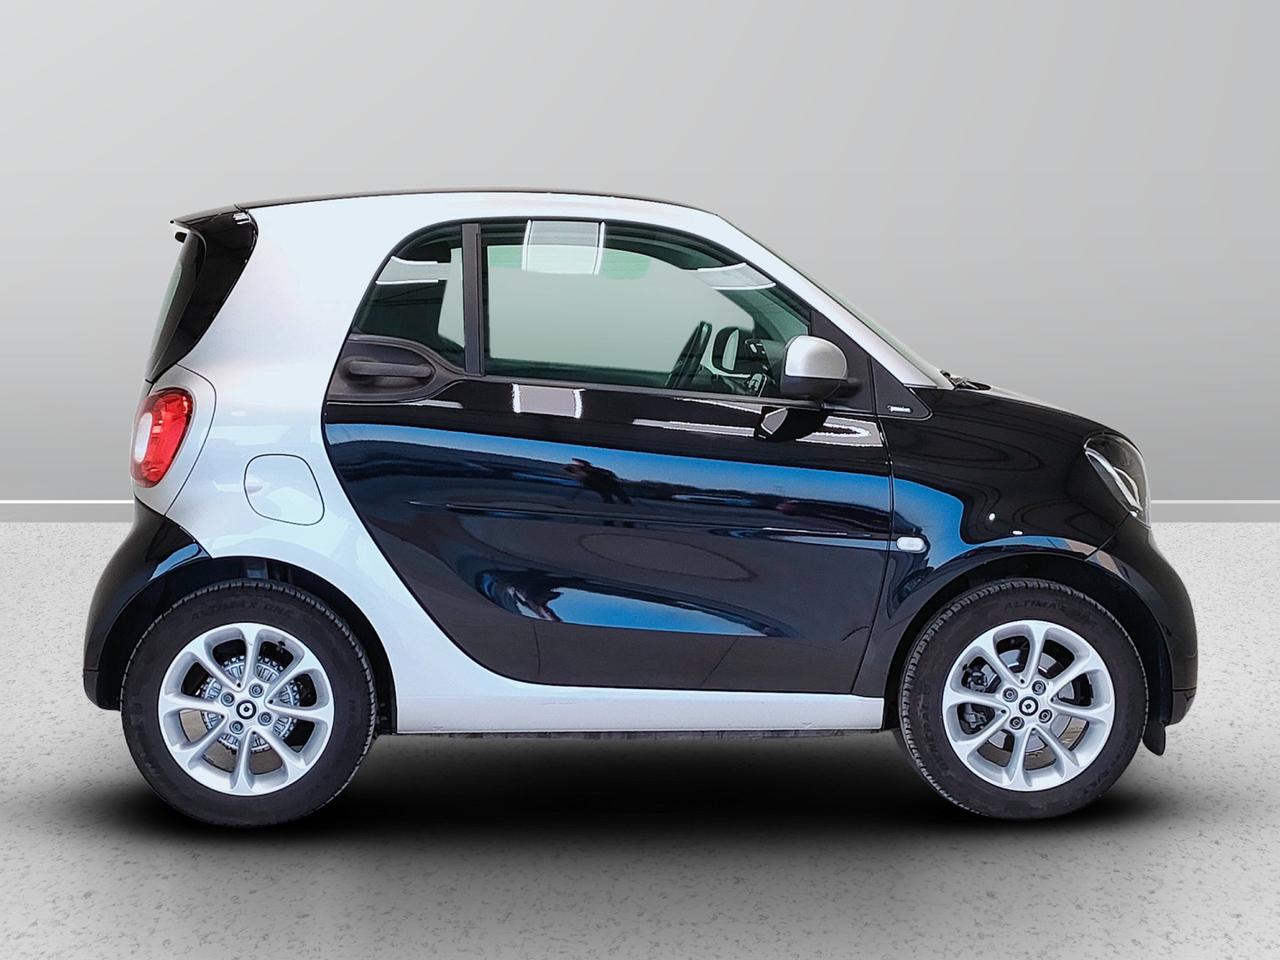 SMART Fortwo III 2015 Fortwo 1.0 Passion 71cv twinamic